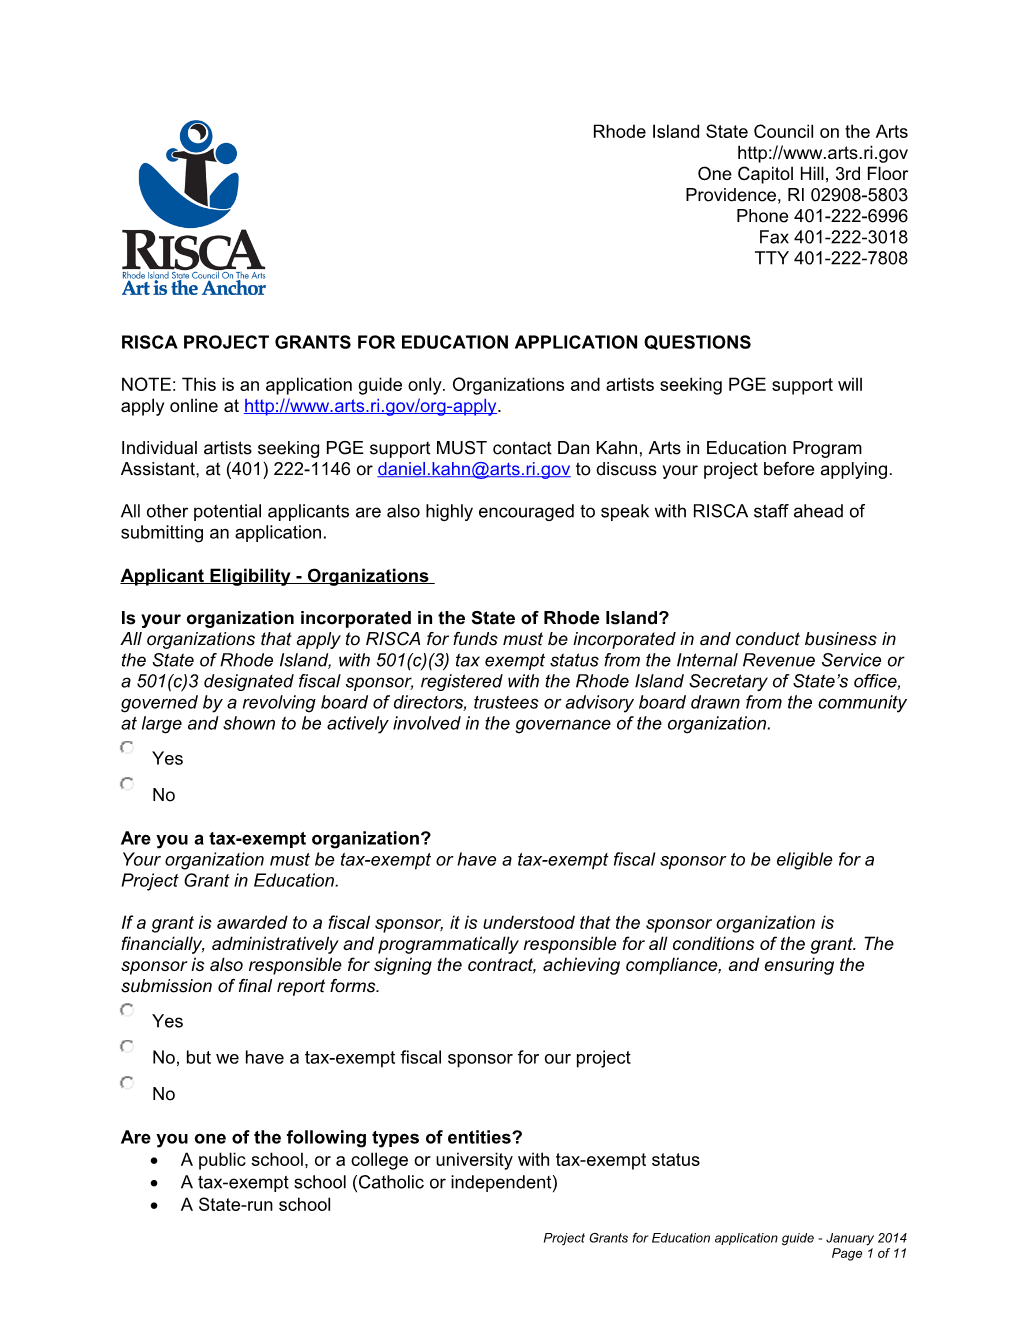 Risca Project Grants for Education Application Questions